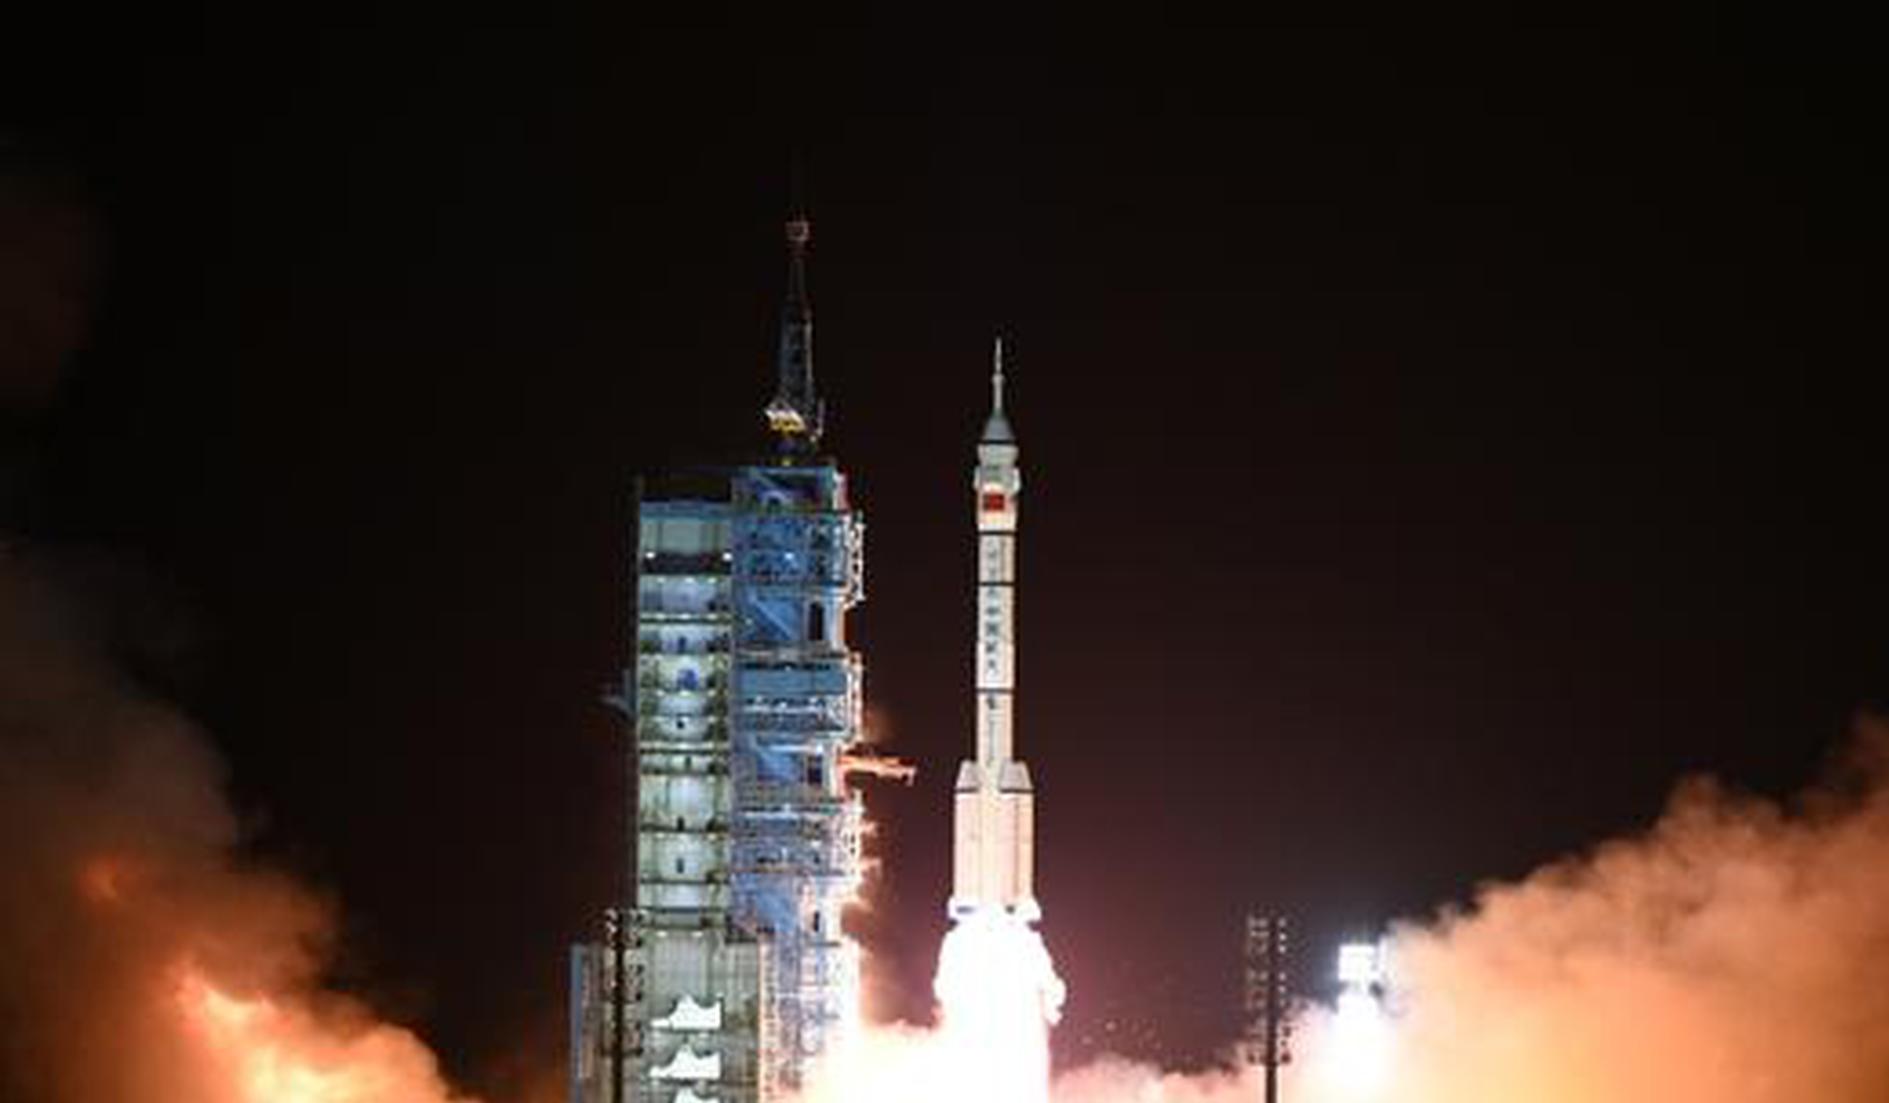 China to launch 2 manned spacecraft, one cargo spacecraft in 2023: blue book